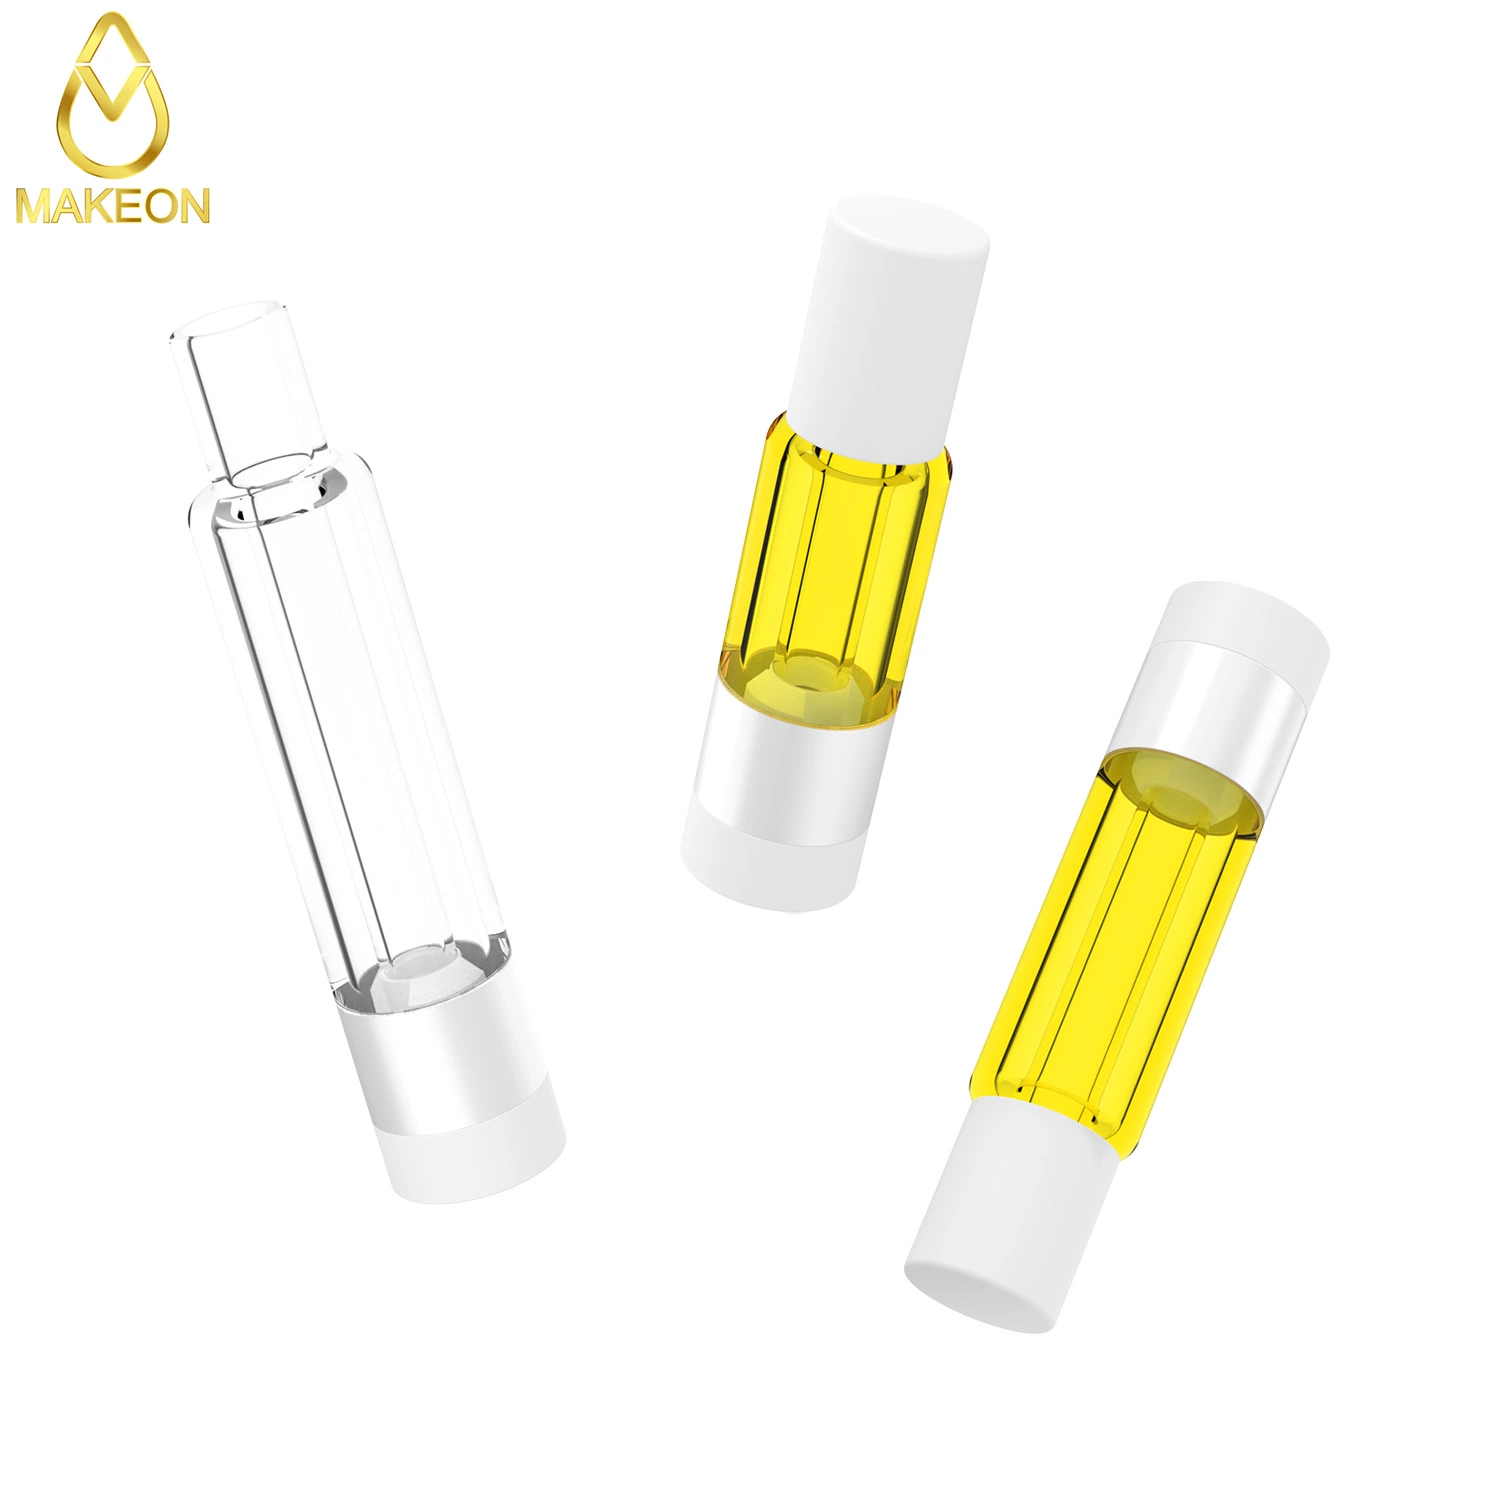 Makeon G9 OEM Empty Atomizers Whole Glass 1.0ml 1.5ml 2.0ml Cartridges Tank Glass Vape Thick Oil Bottom Airflow Atomizer Puffin Choices Ruby Custom Packaging